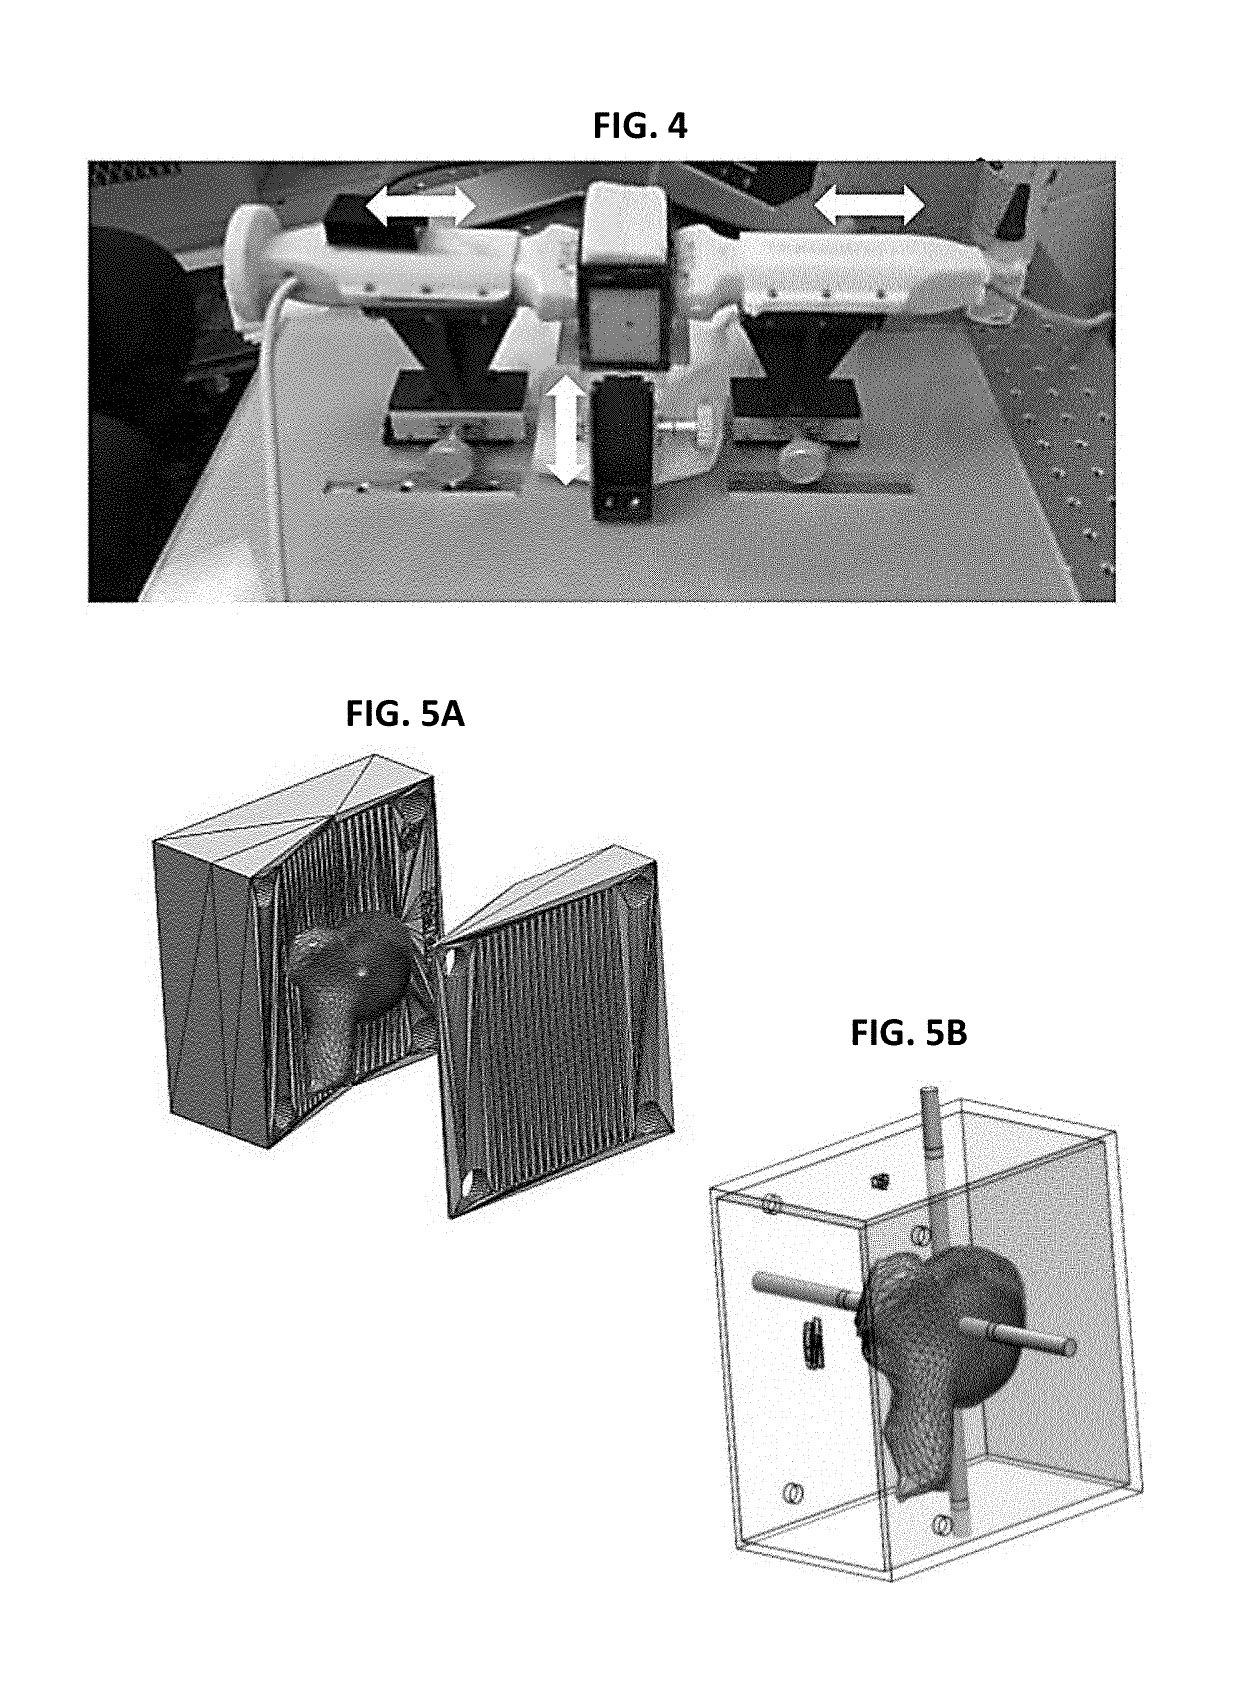 Tissue characterization with acoustic wave tomosynthesis